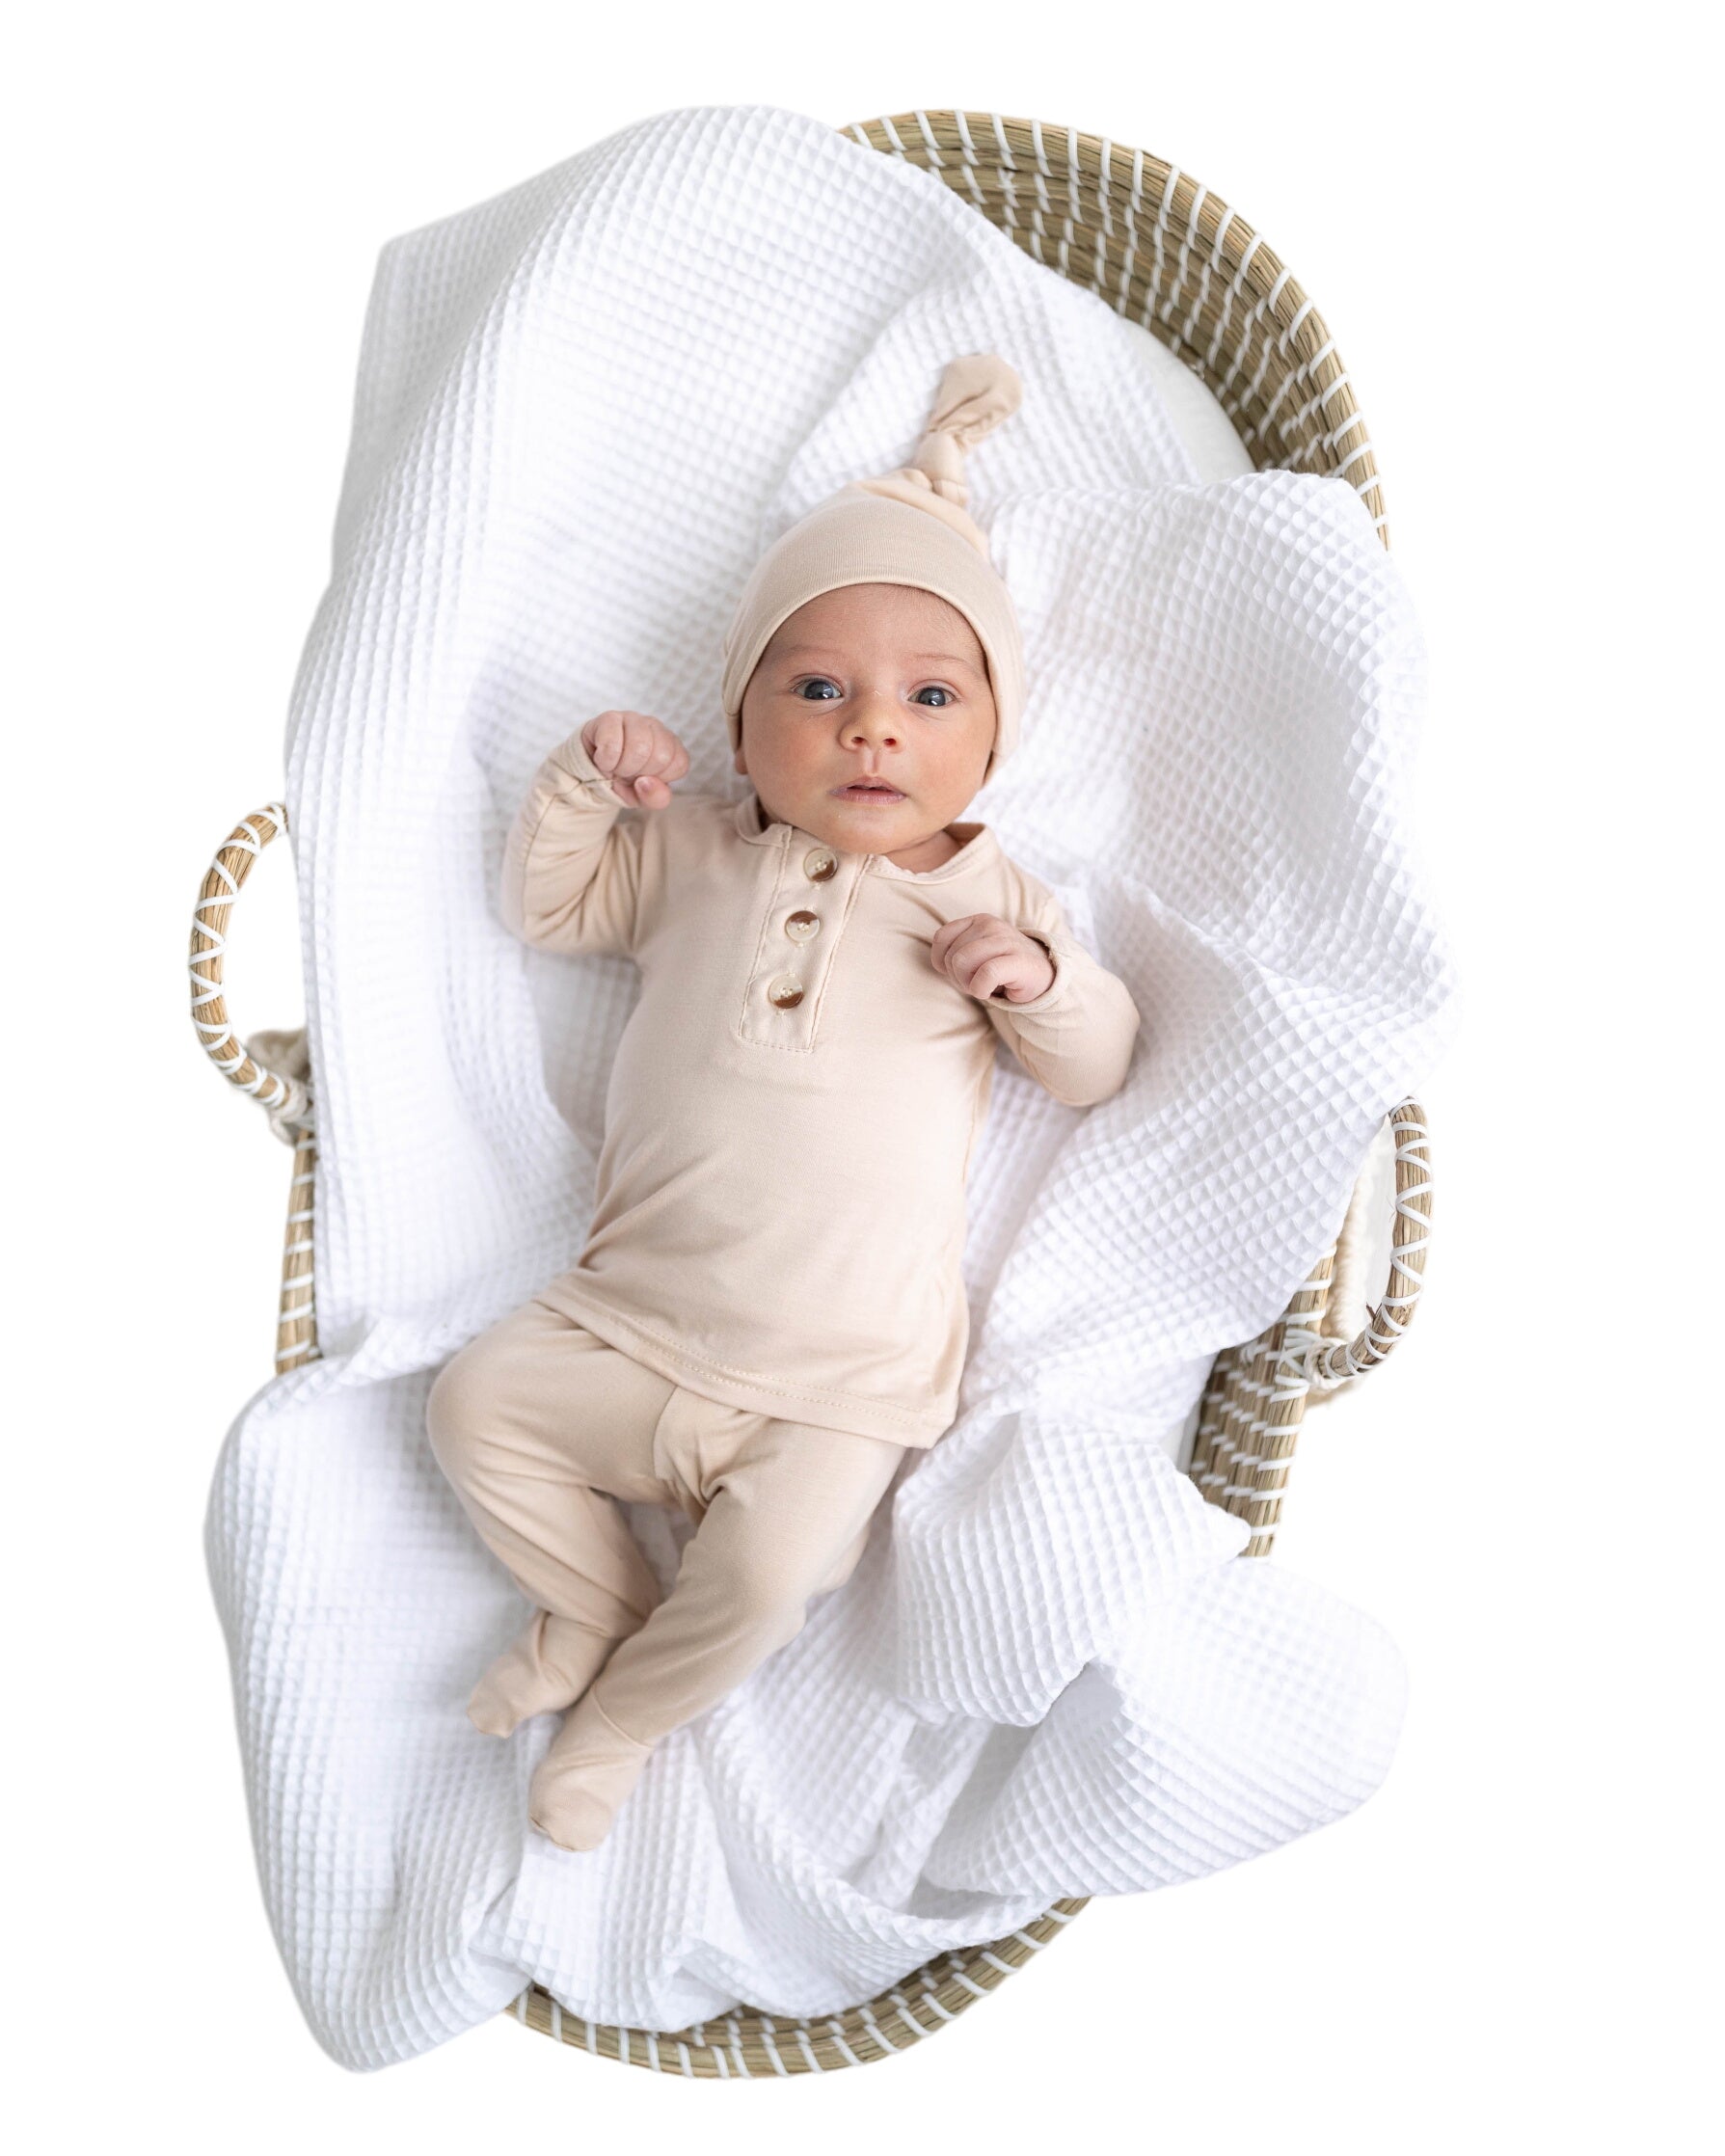 Top And Bottom Outfit Set (newborn-12 Months Sizes) Sand